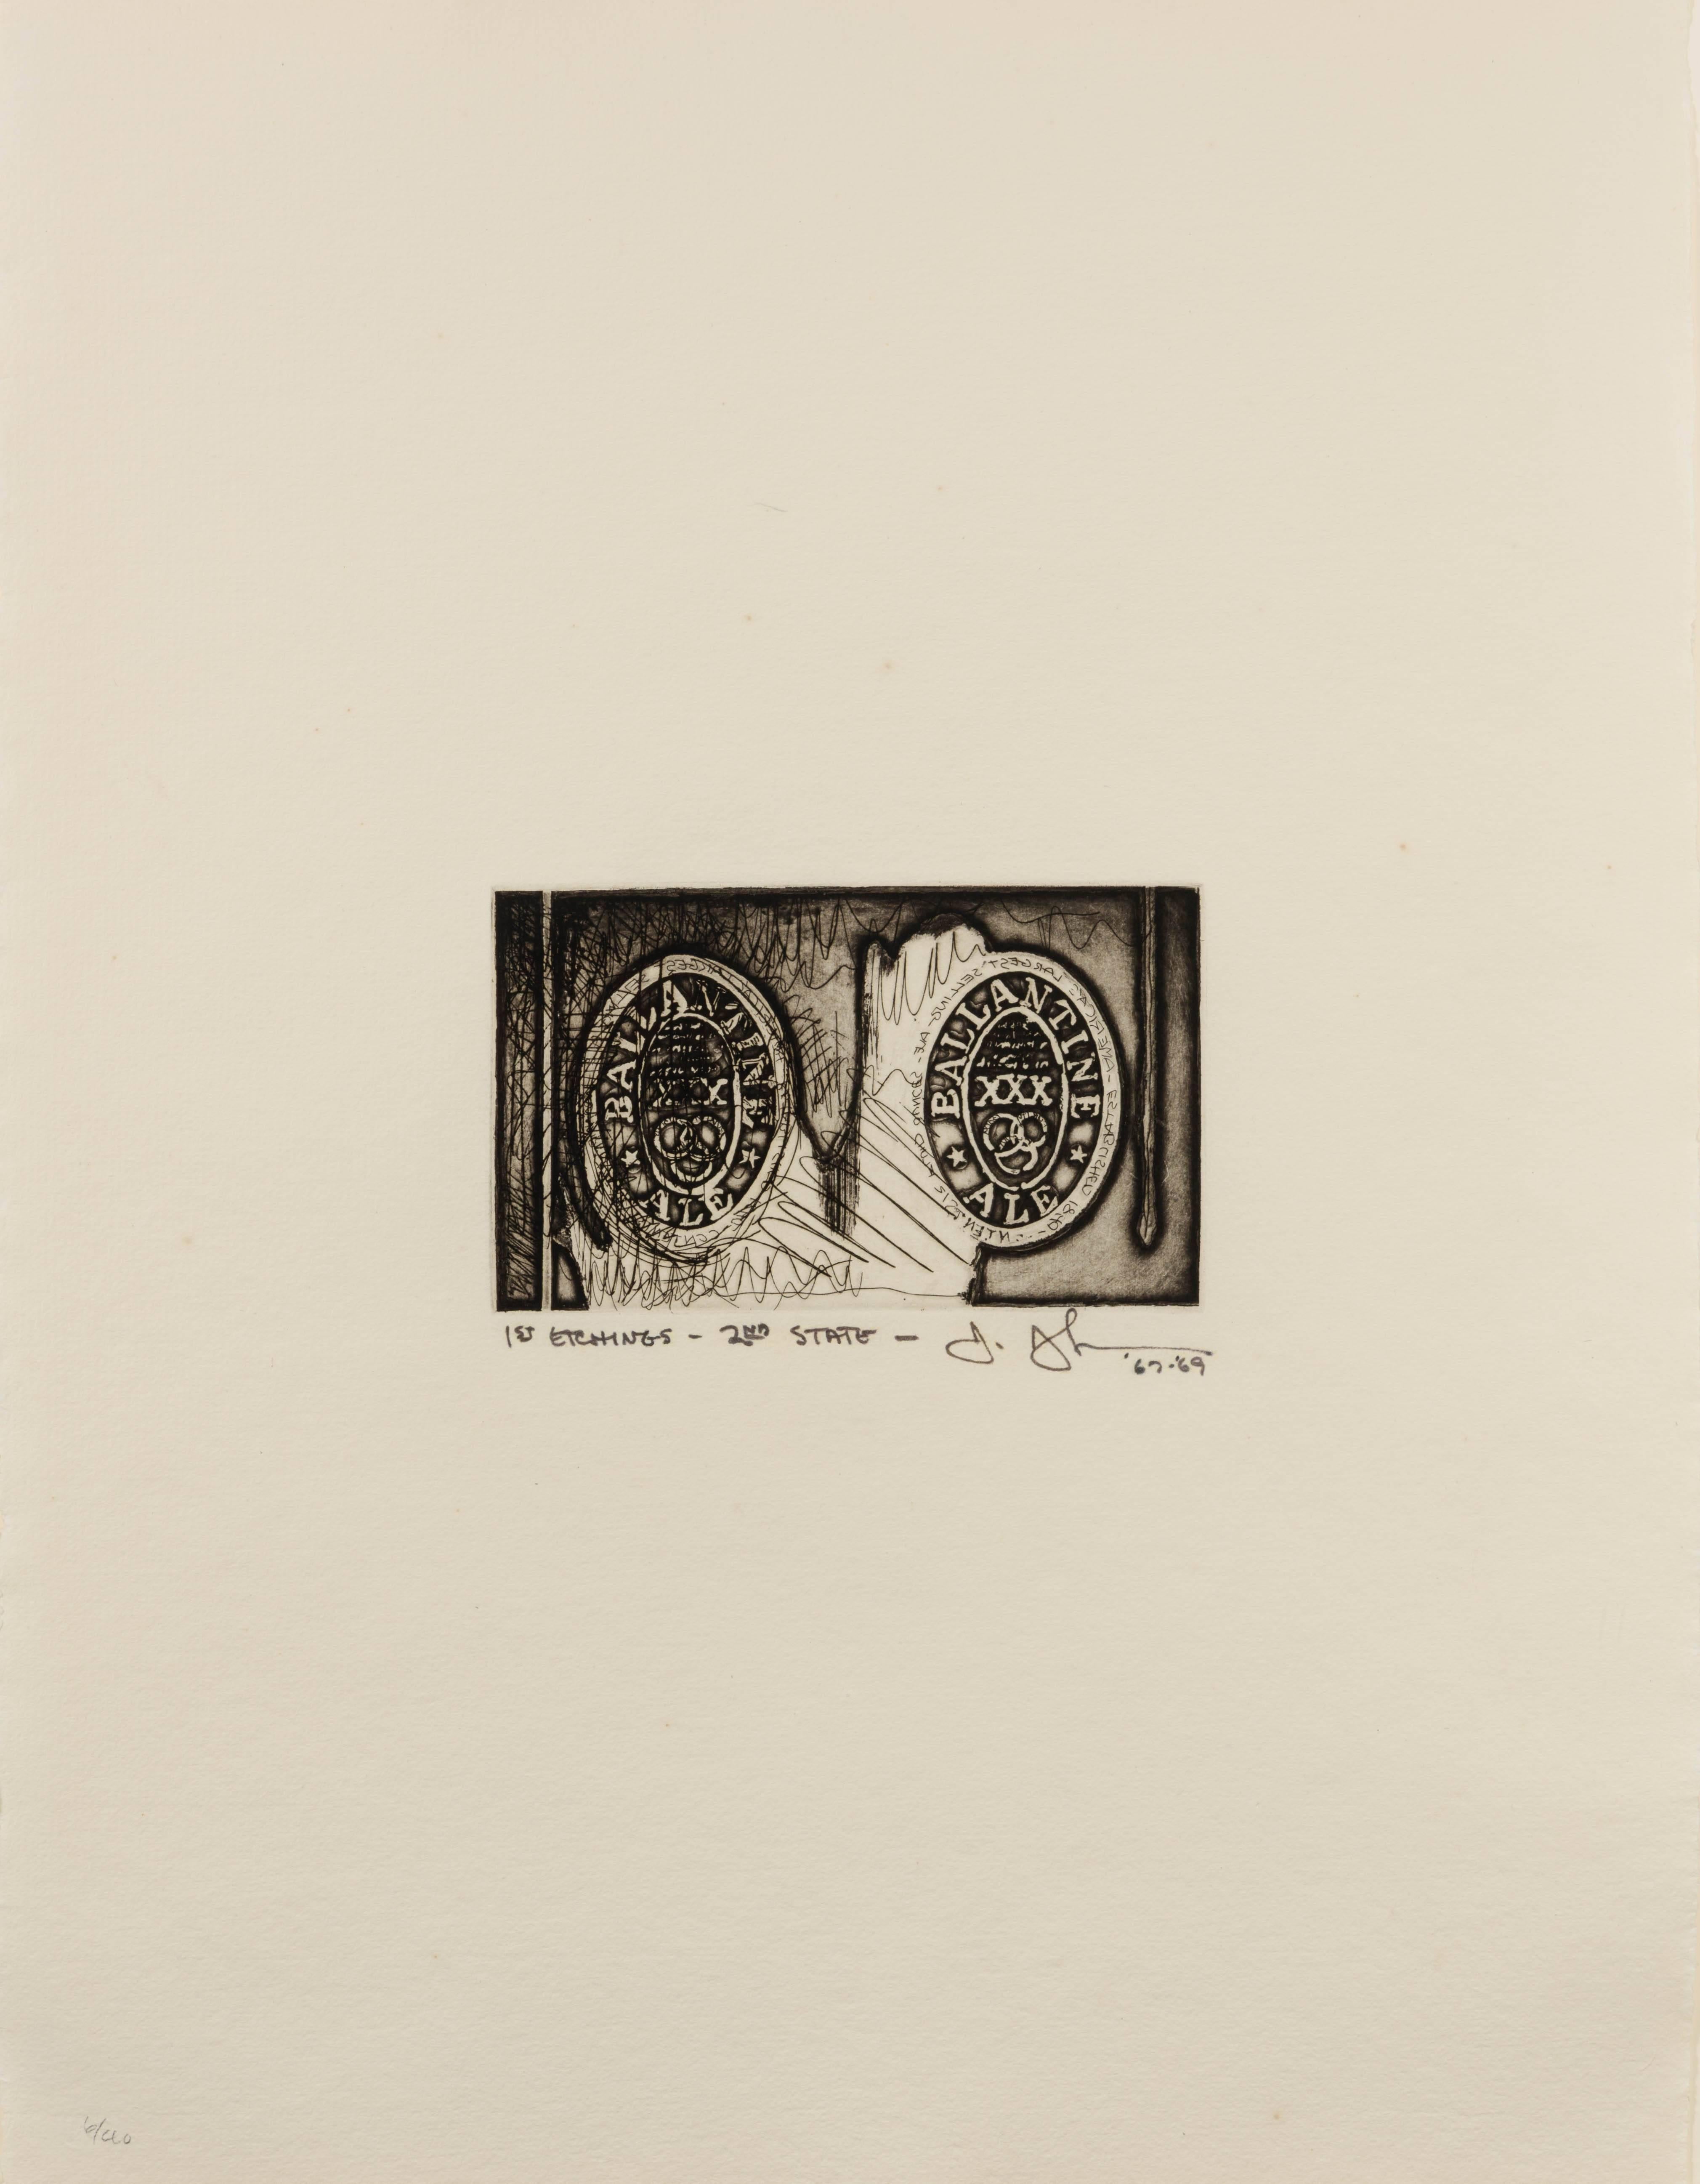 Ale Cans, 1st Etchings, 2nd State - Contemporary Print by Jasper Johns